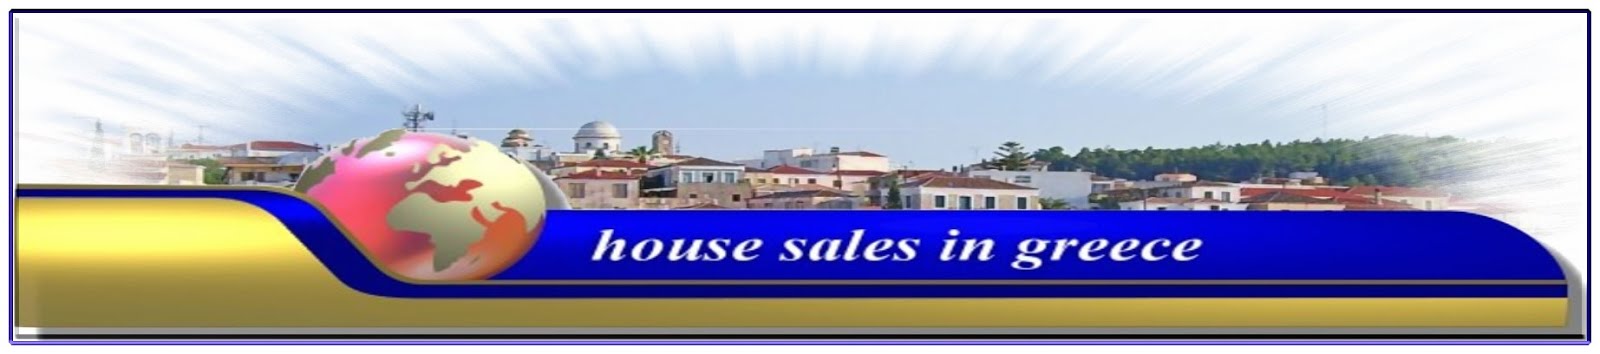 house sales in greece